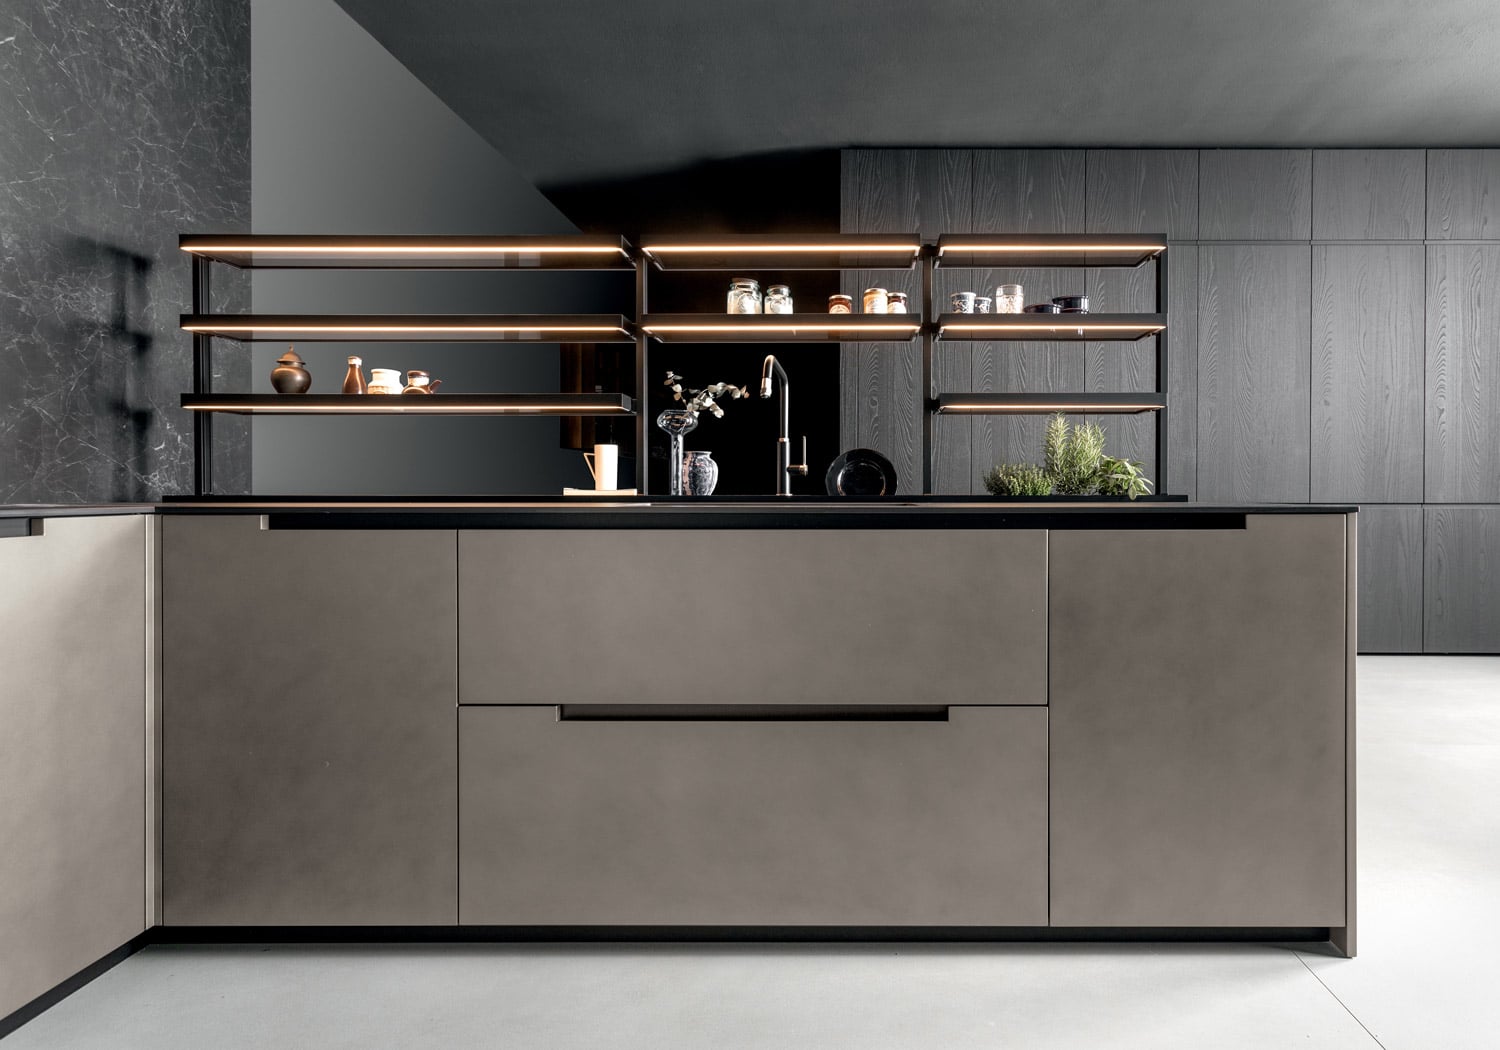 The width of the handles was customized for each cabinet to create the desired effect, with some doors showing the integrated black channel and some hiding it in part. On the back is an additional pantry wall in Smoked Walnut.